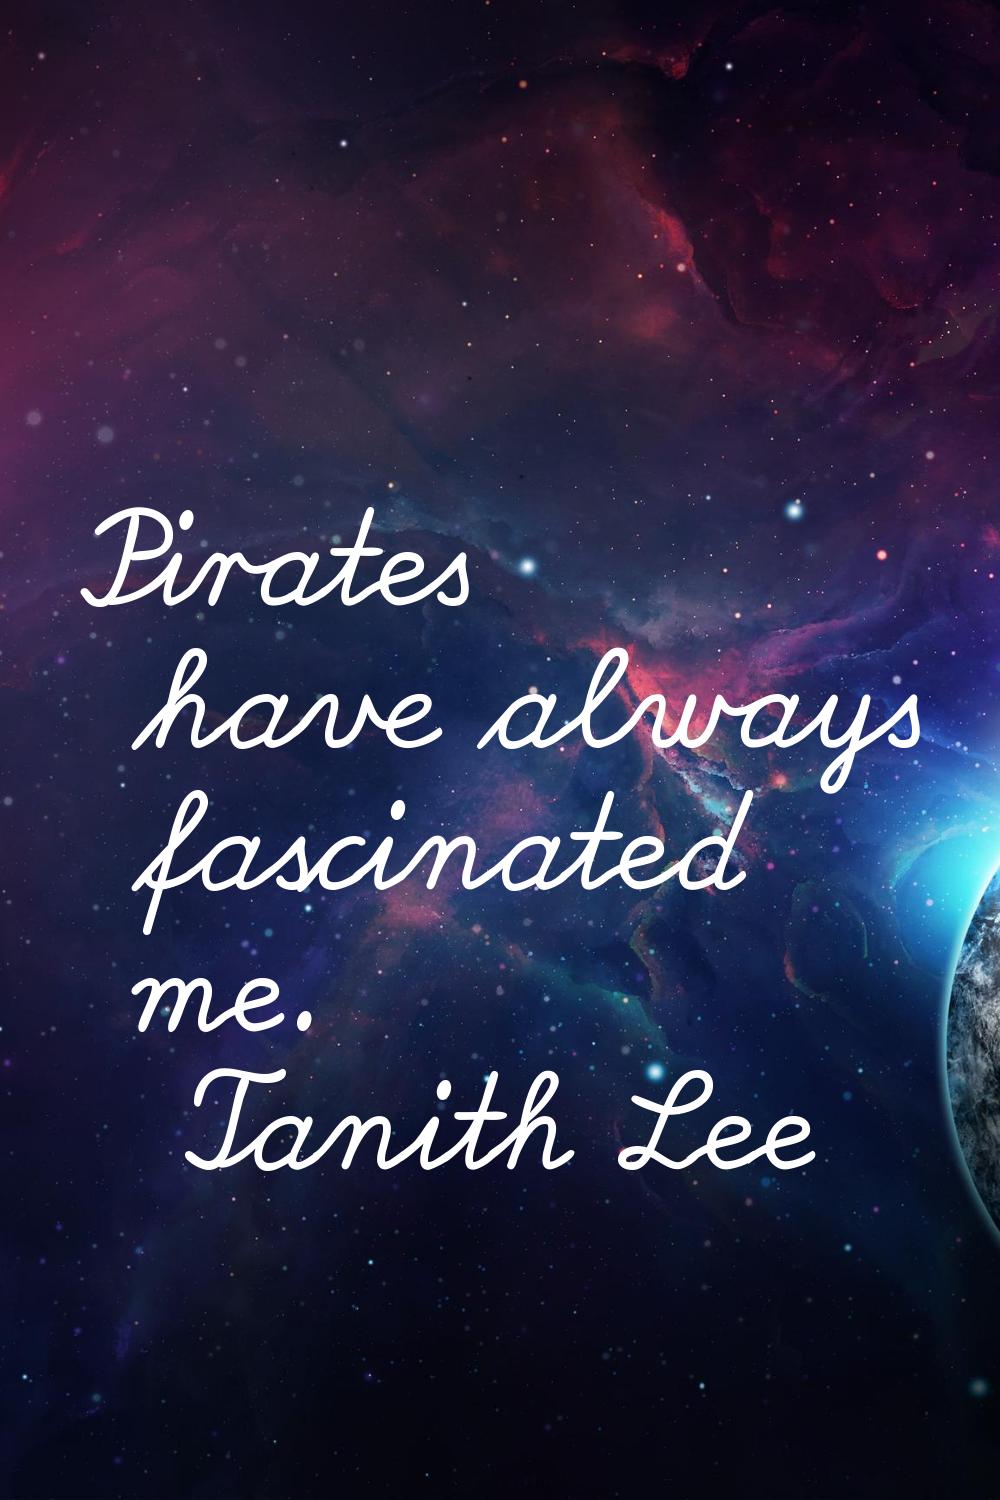 Pirates have always fascinated me.